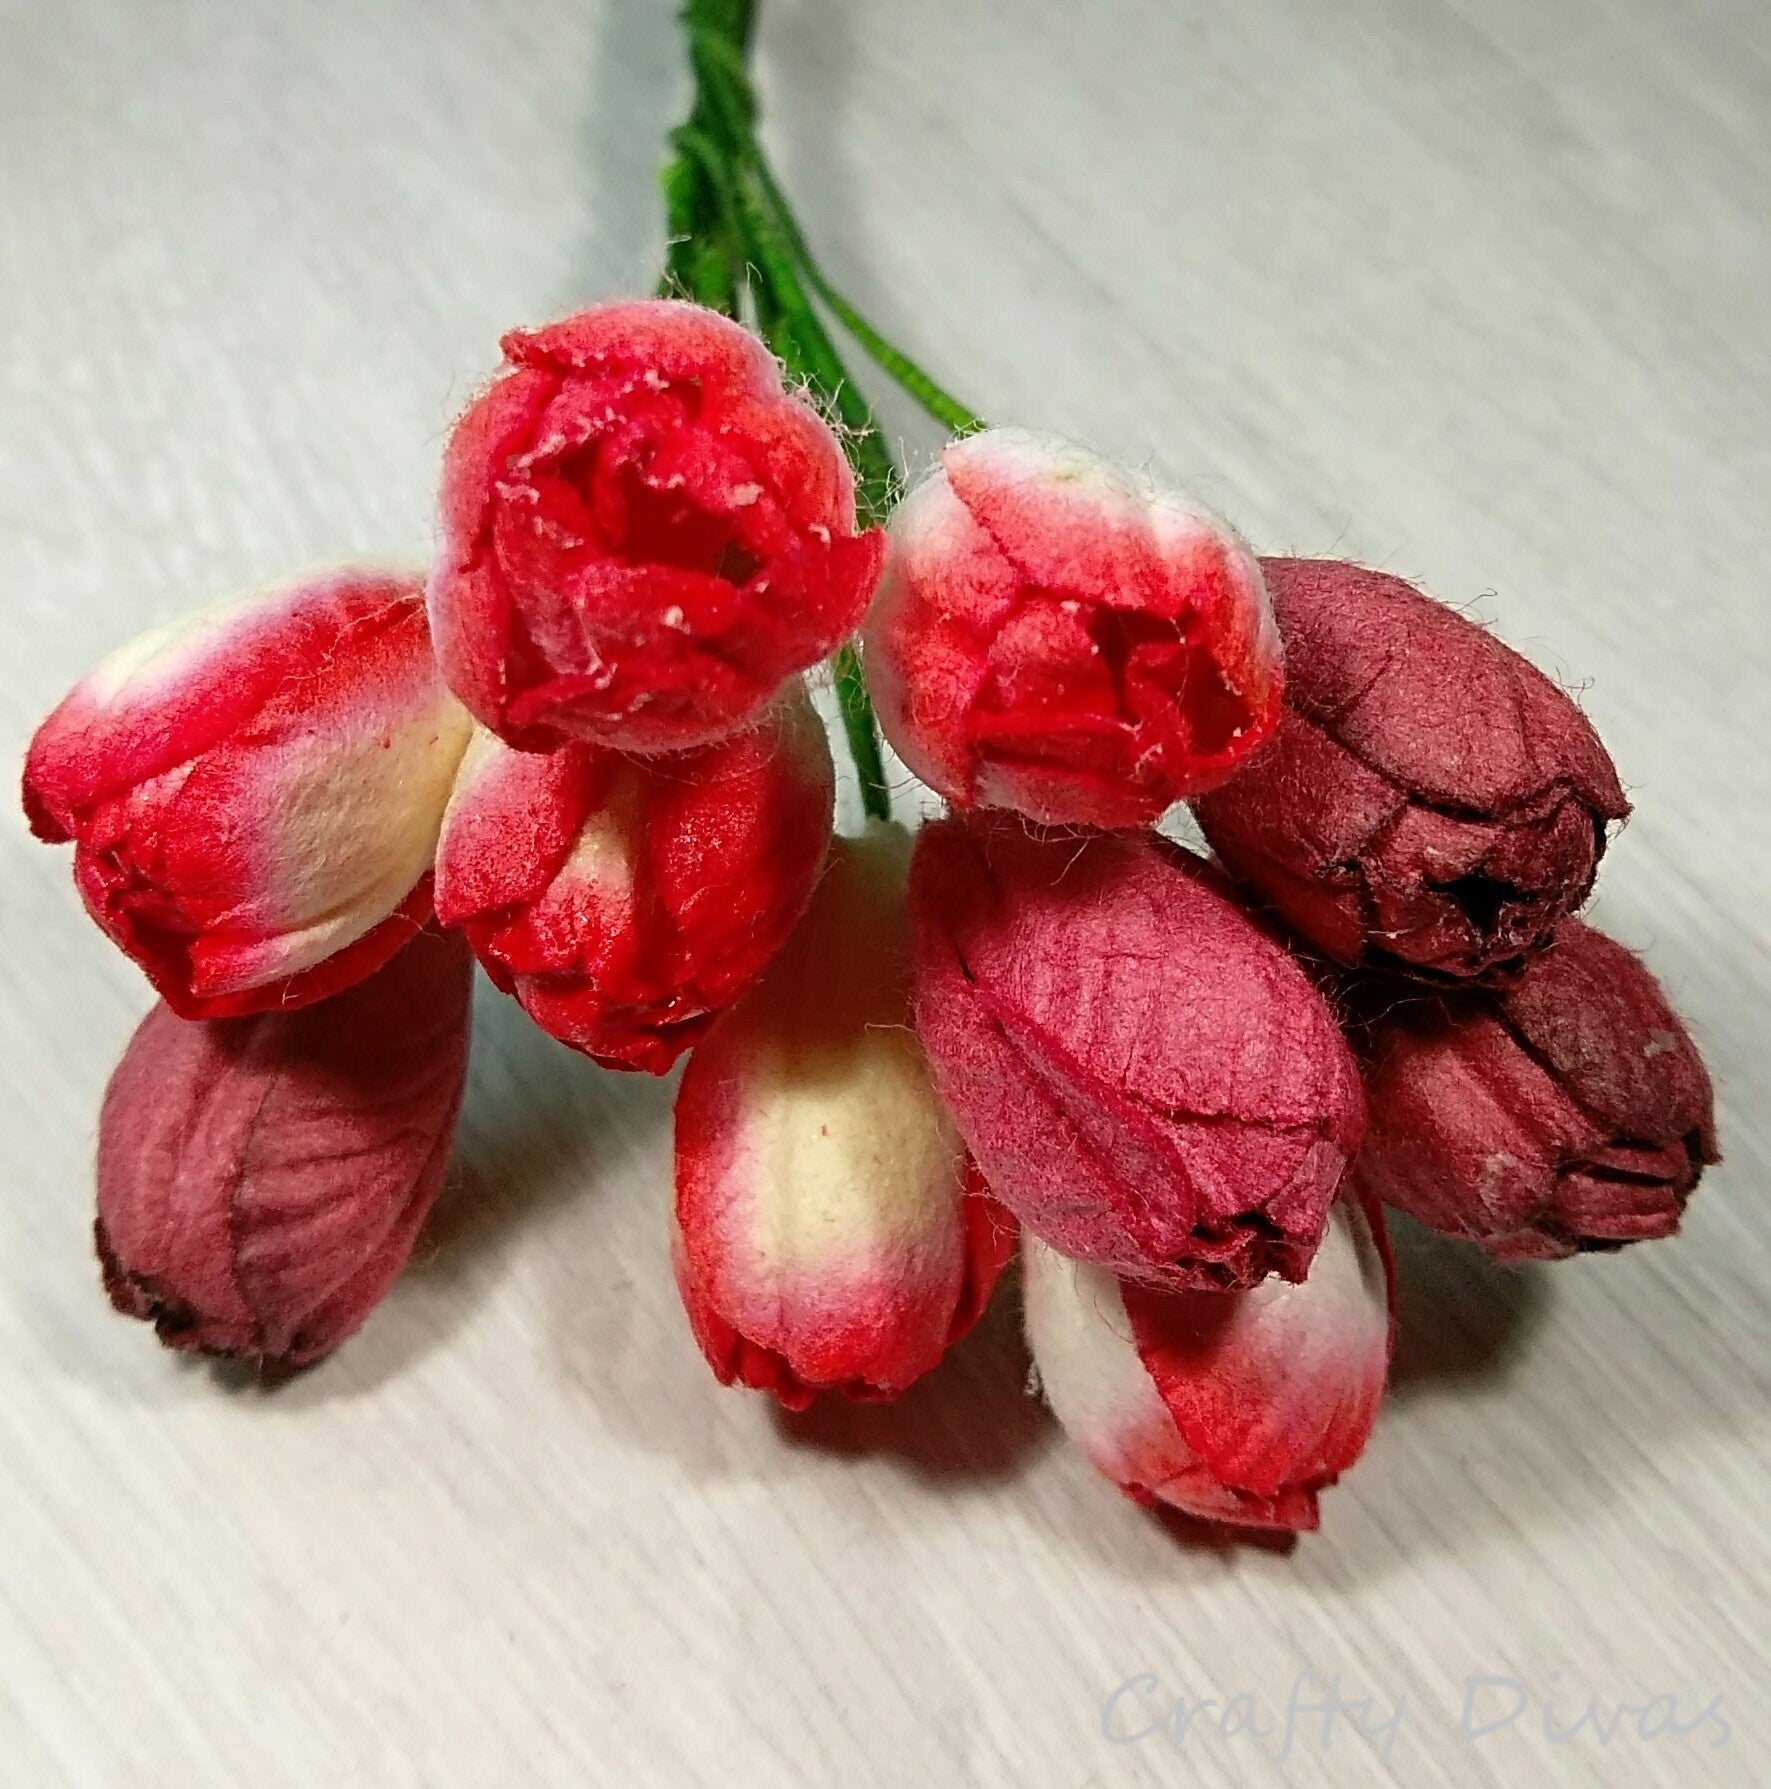 Mulberry Tulips - Shades of Red